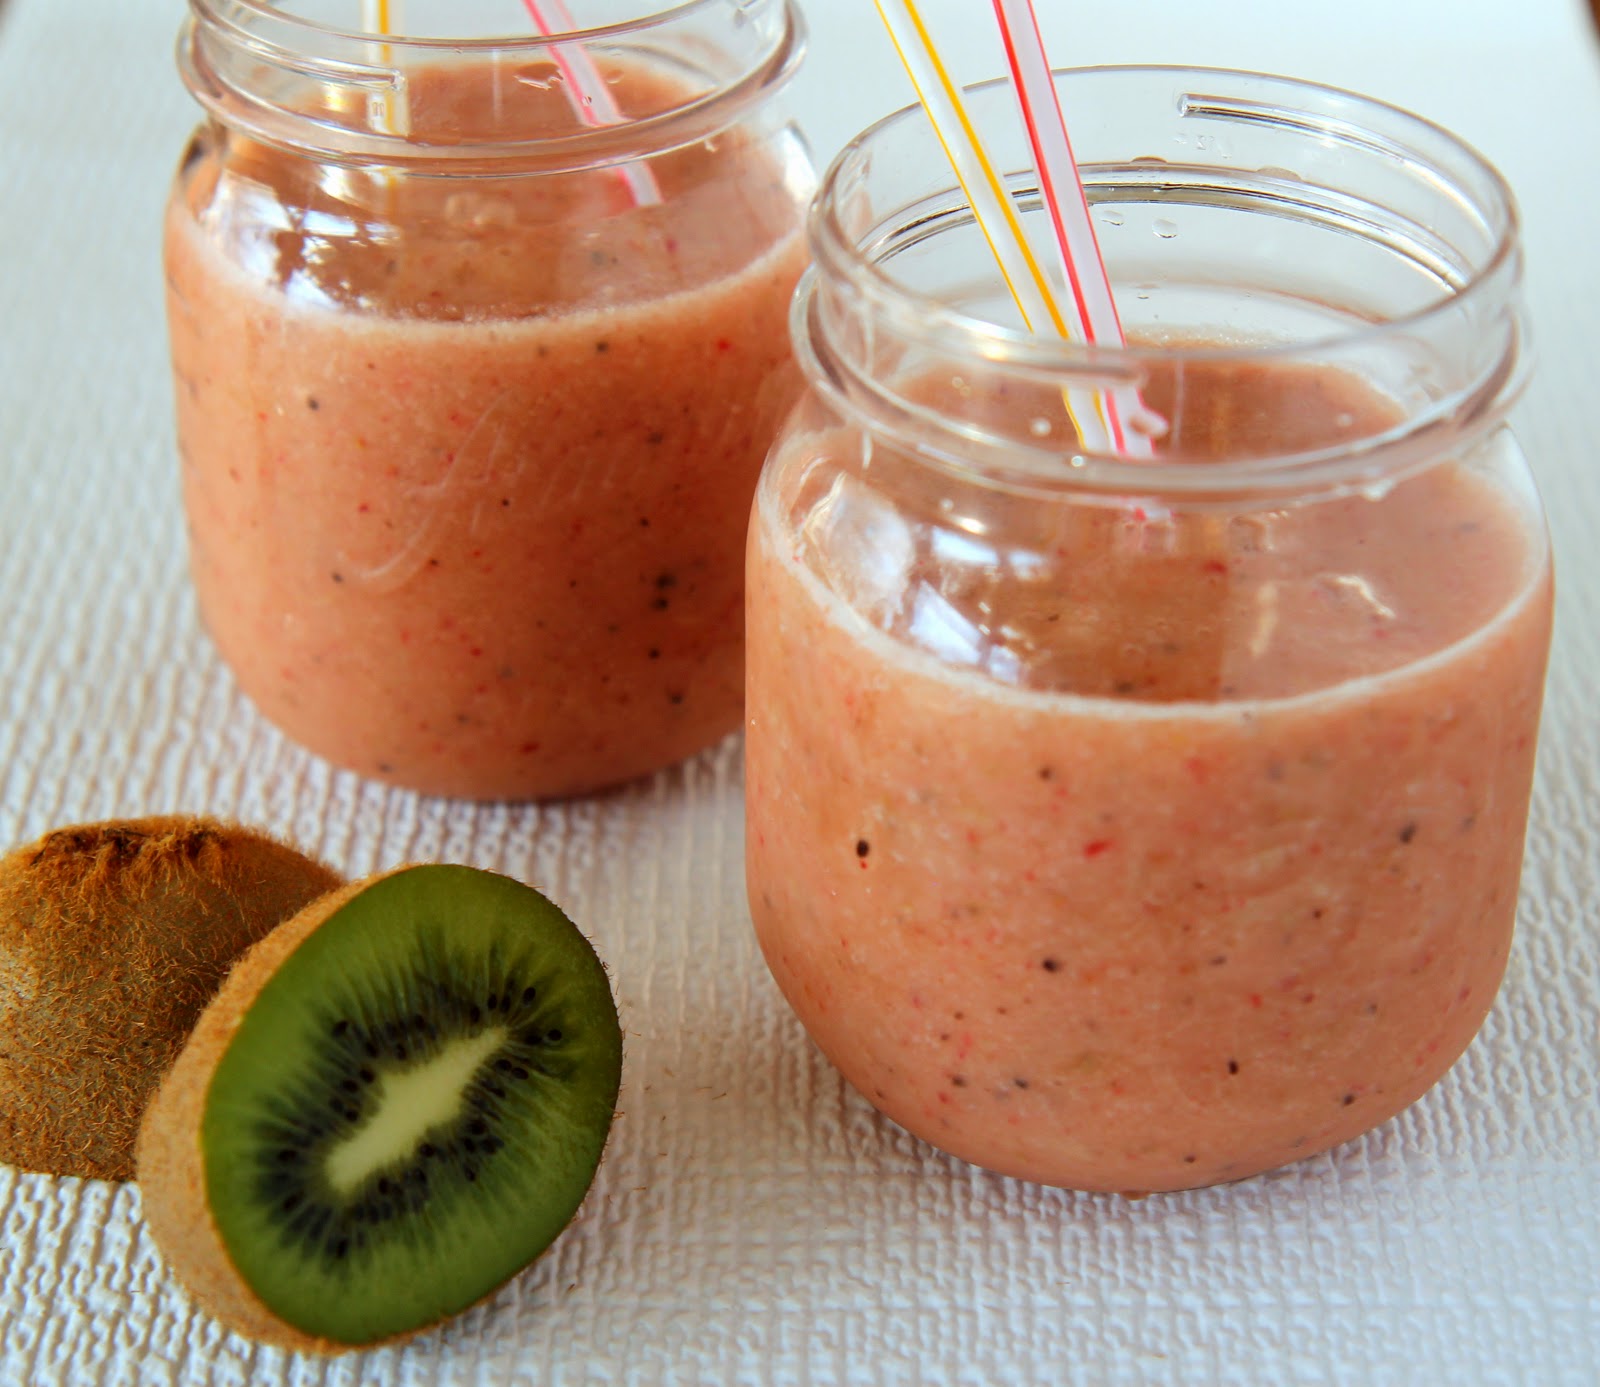 Jump-start a healthy New Year with these easy smoothie recipes for all dietary preferences!